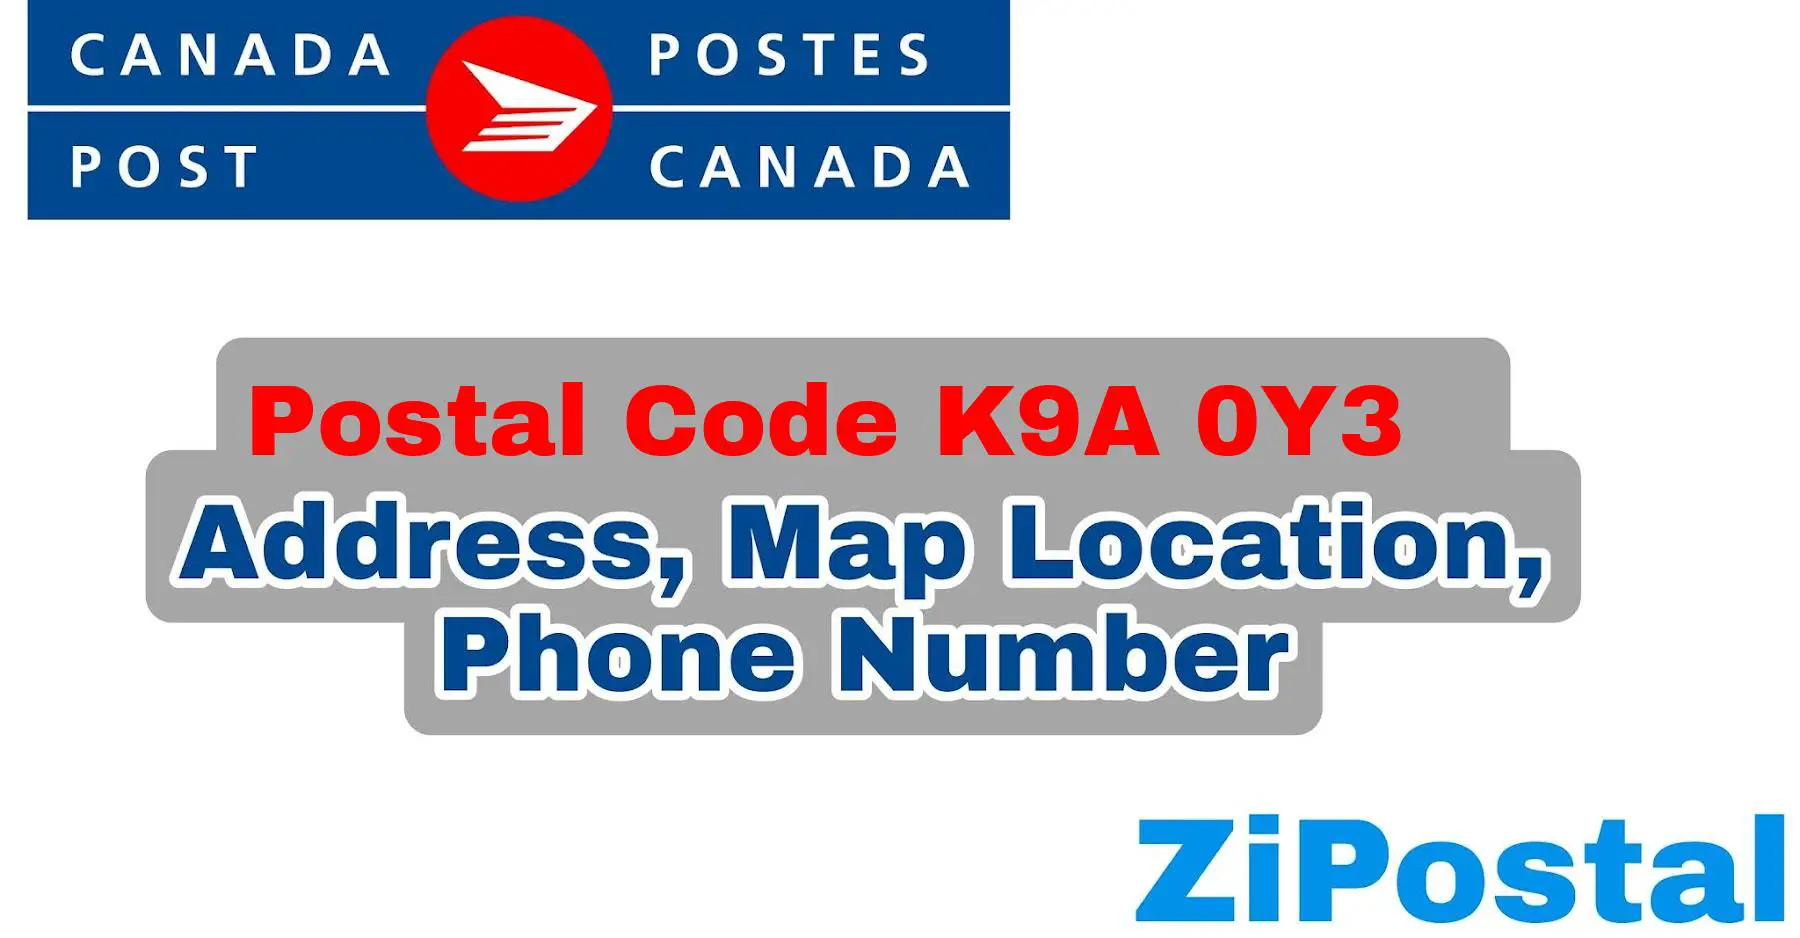 Postal Code K9A 0Y3 Address Map Location and Phone Number